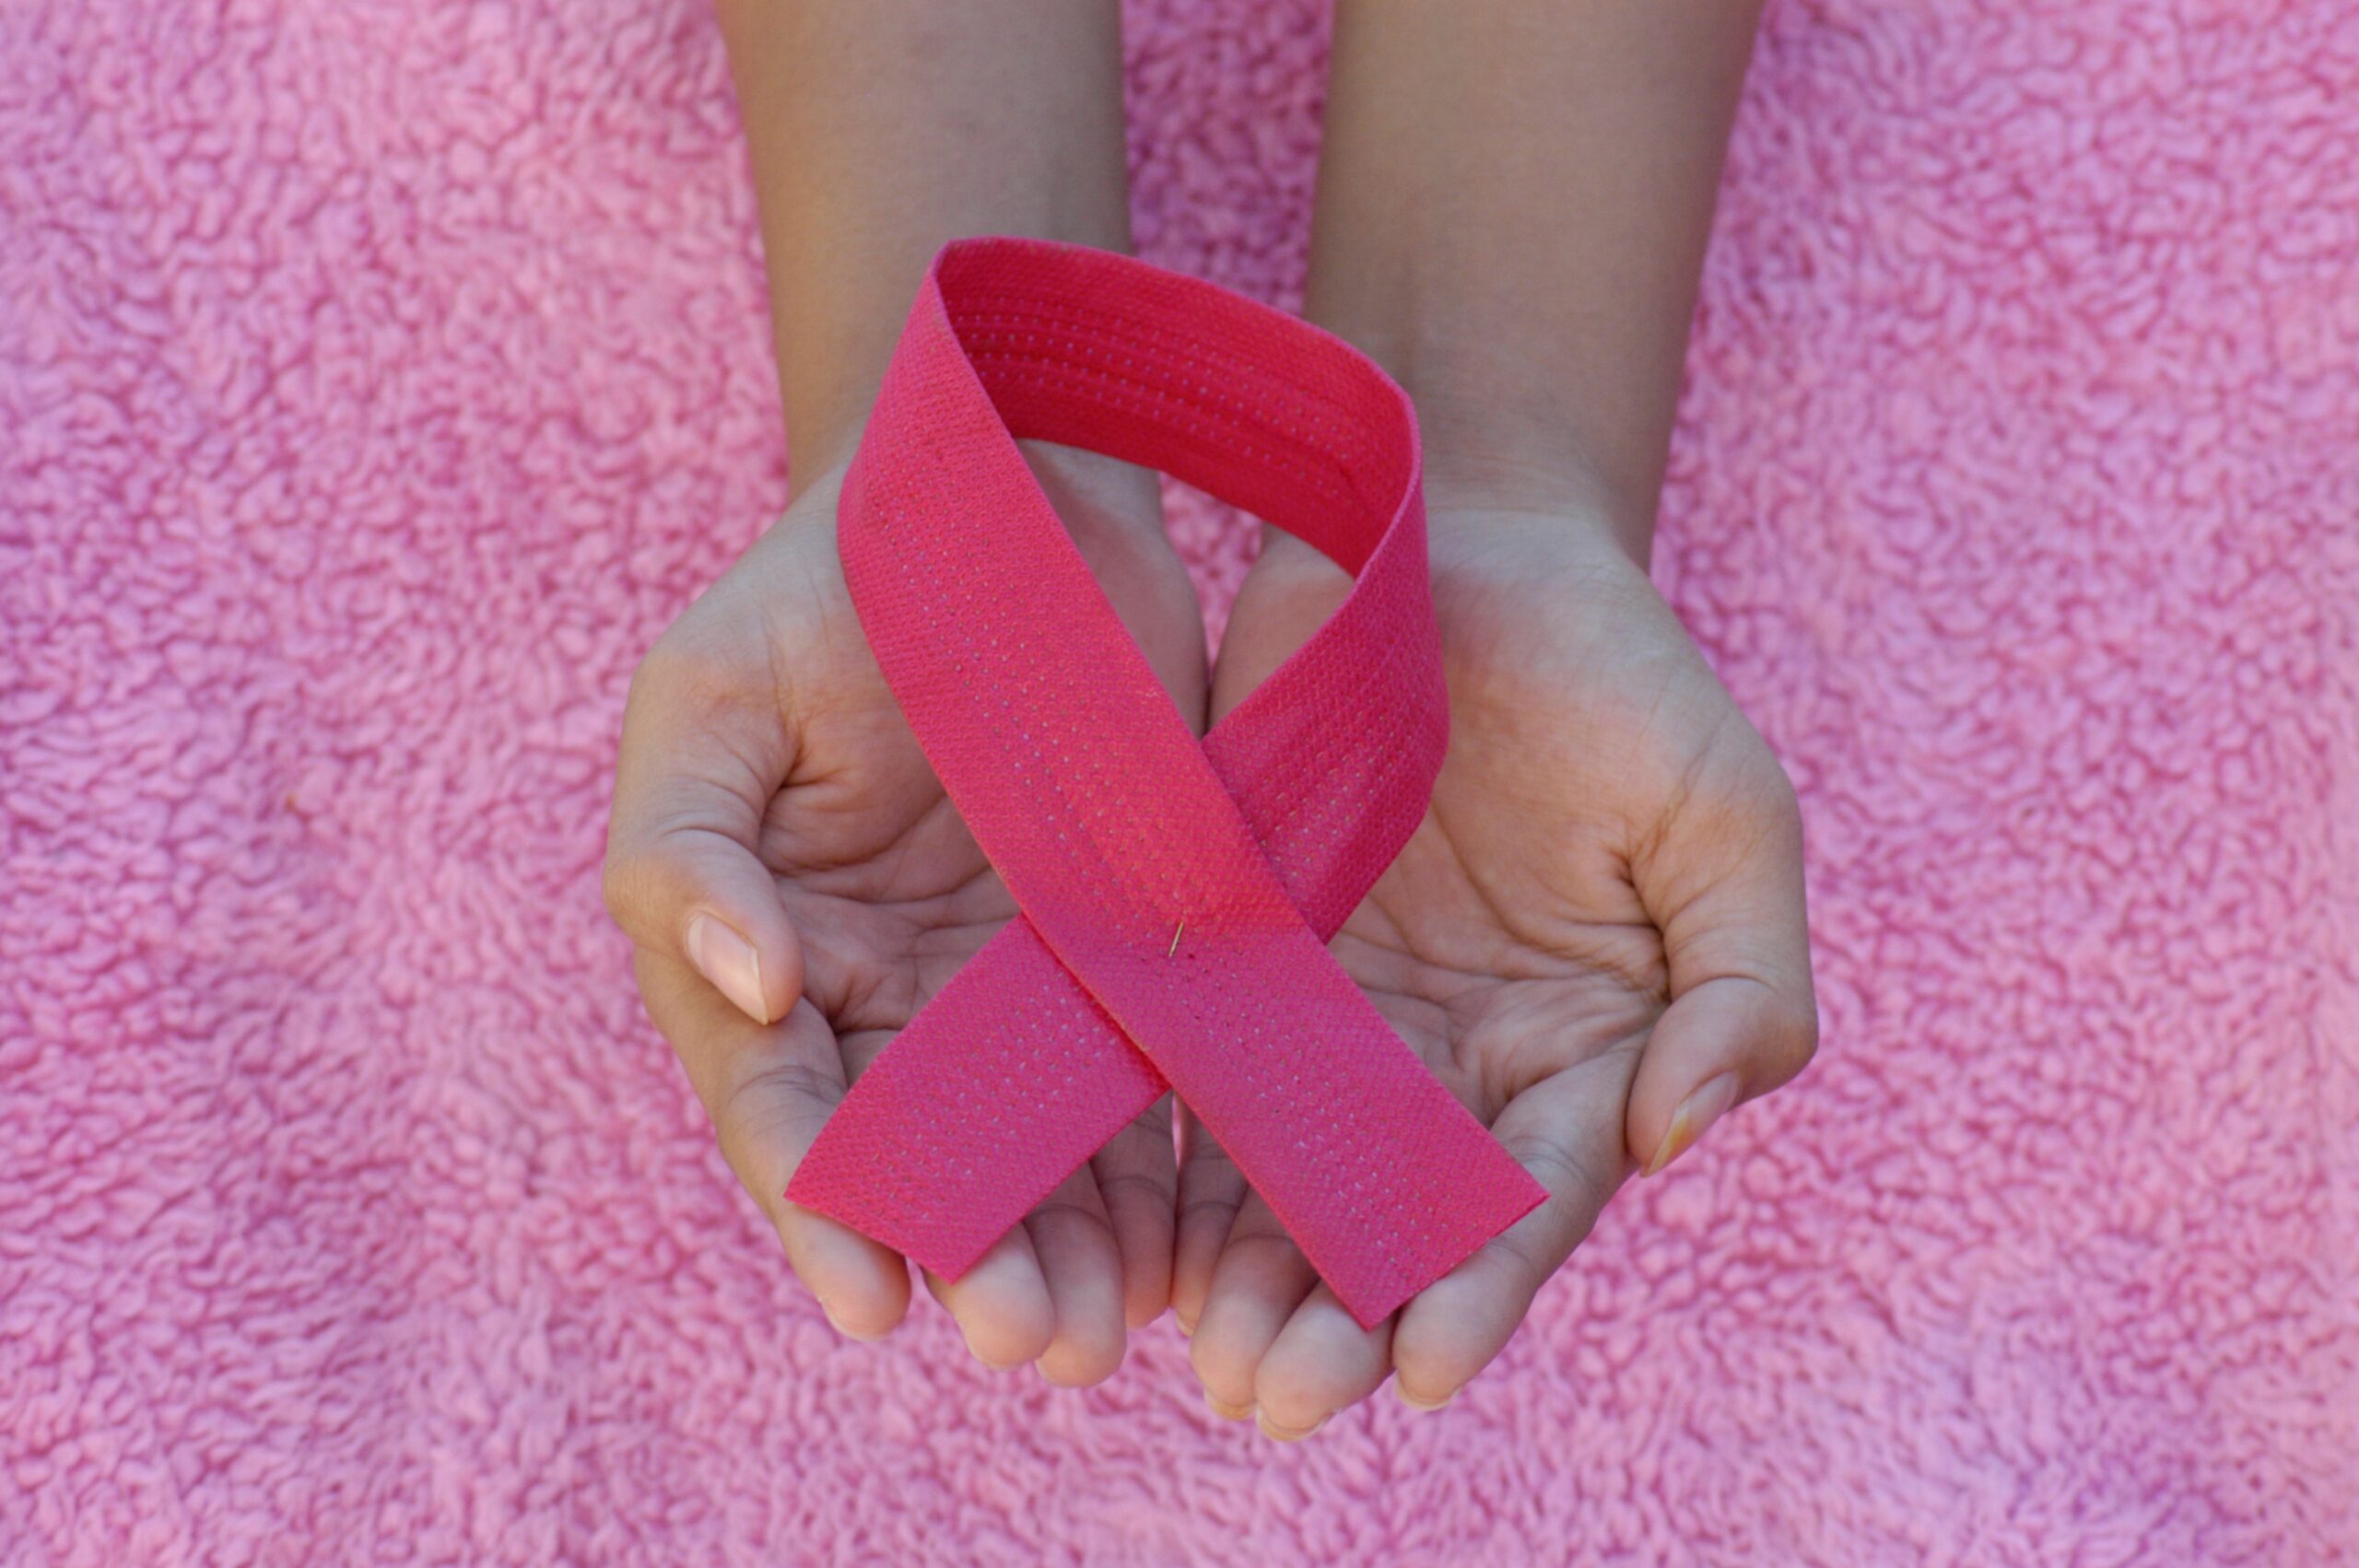 Check yourself for breast cancer by Dr. Hailey Jackson